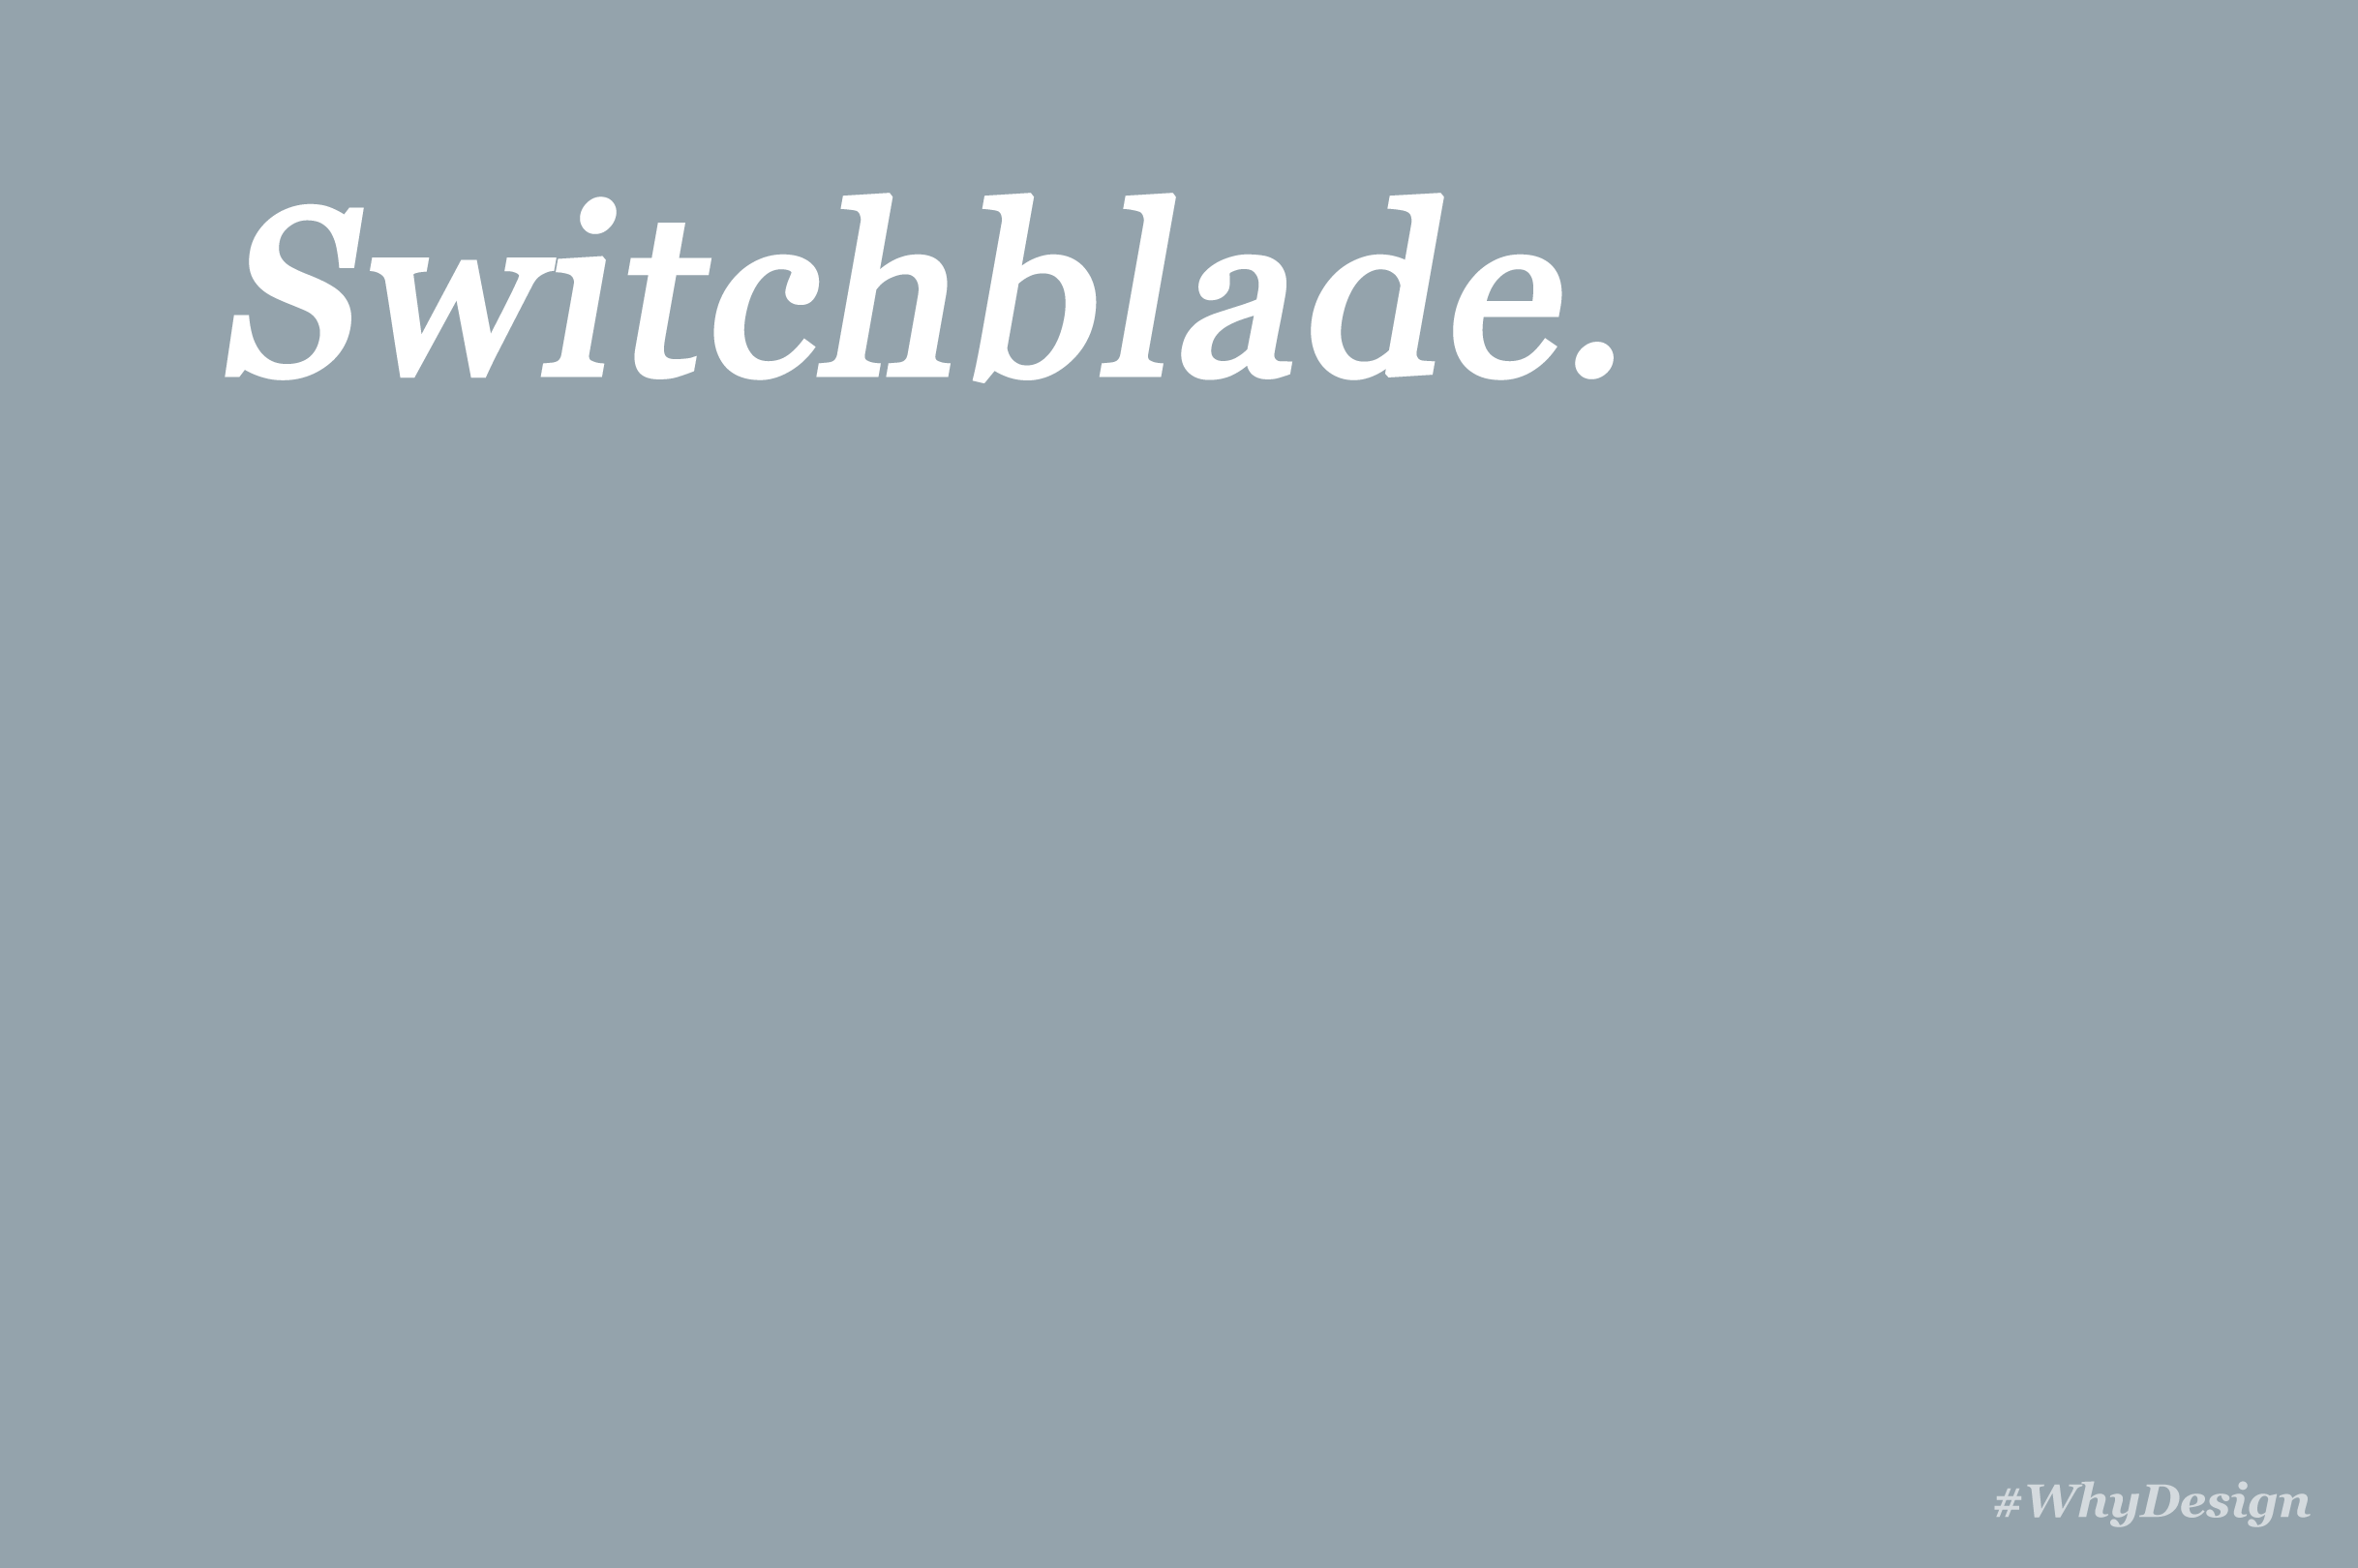 design-is-why-switchblade